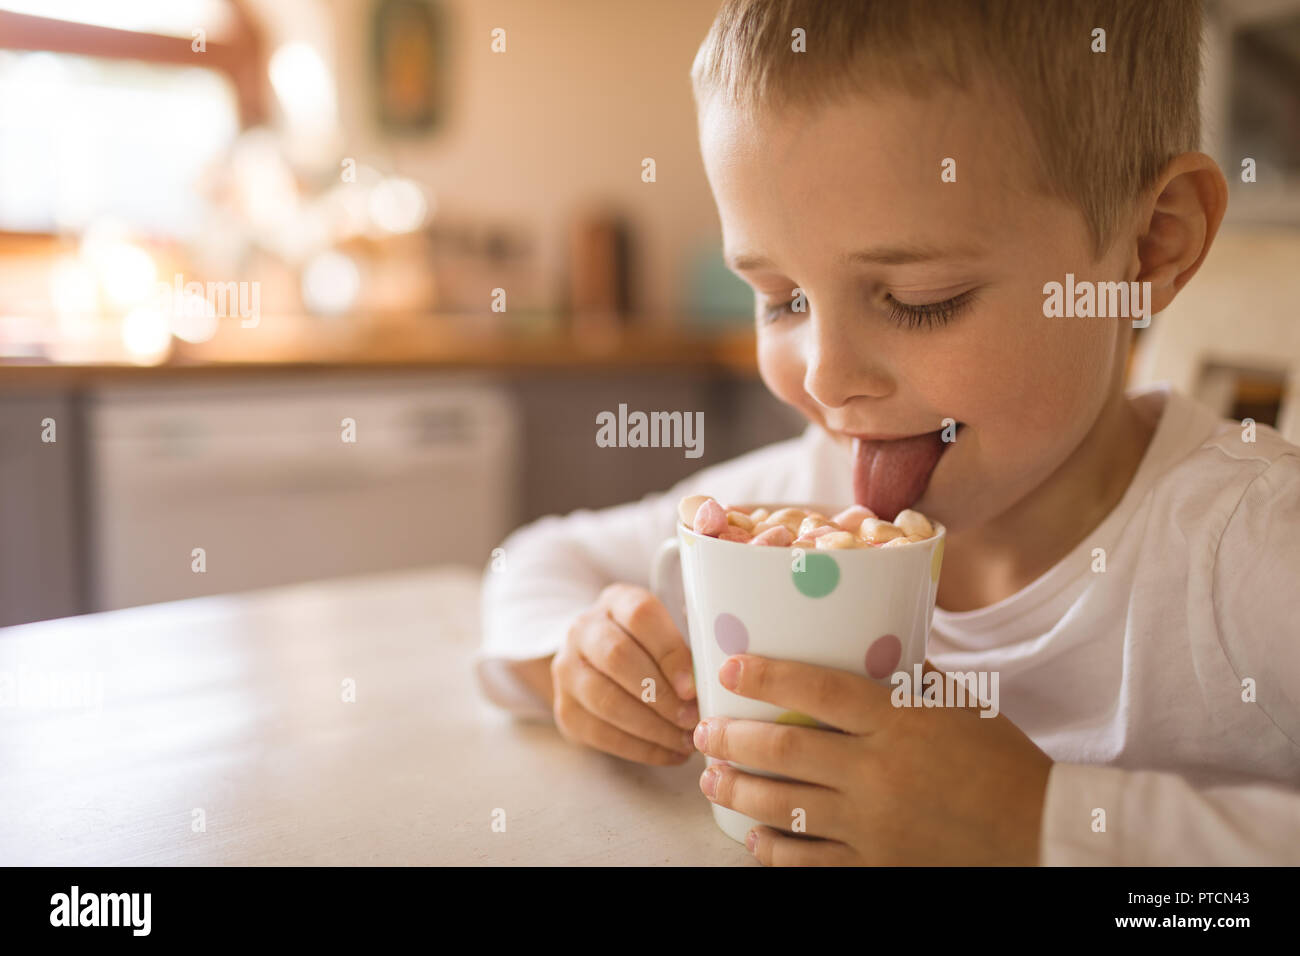 Boy licking a cup full of marshmallows Stock Photo